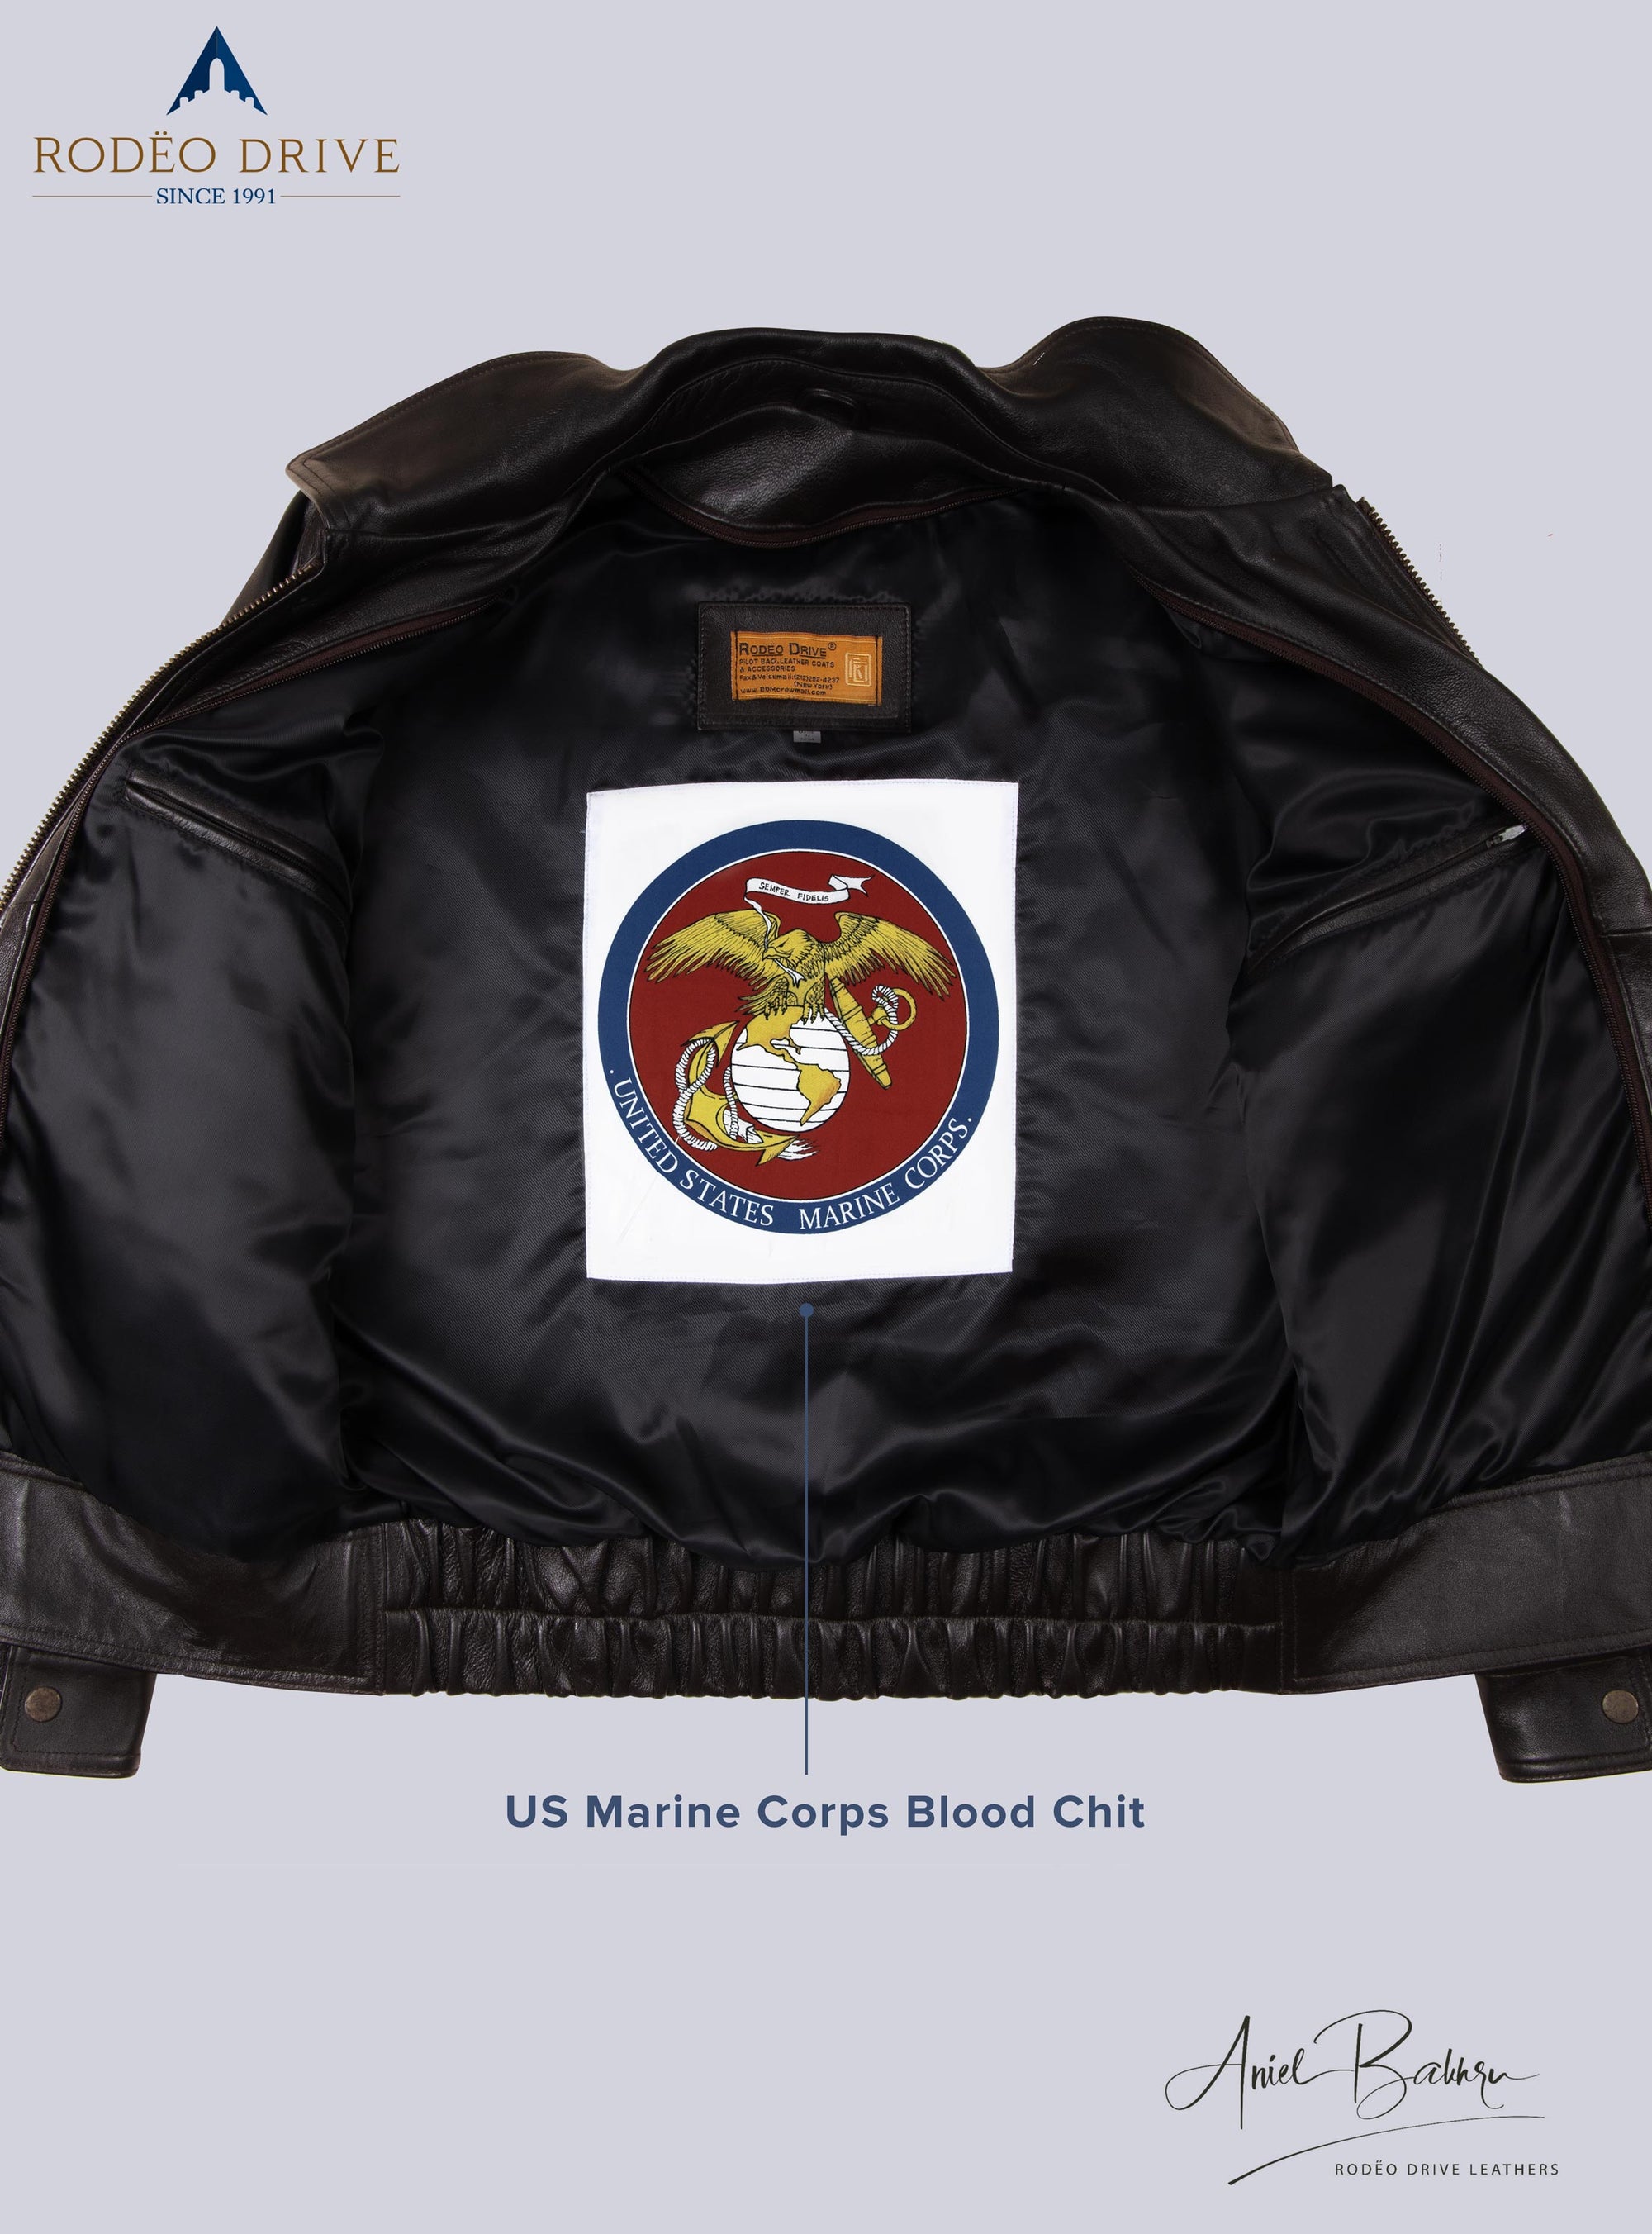 Inside image of  BROWN UNIFORM LEATHER JACKETS for WOMEN. A US Marine corps blood Chit is sewed inside it.